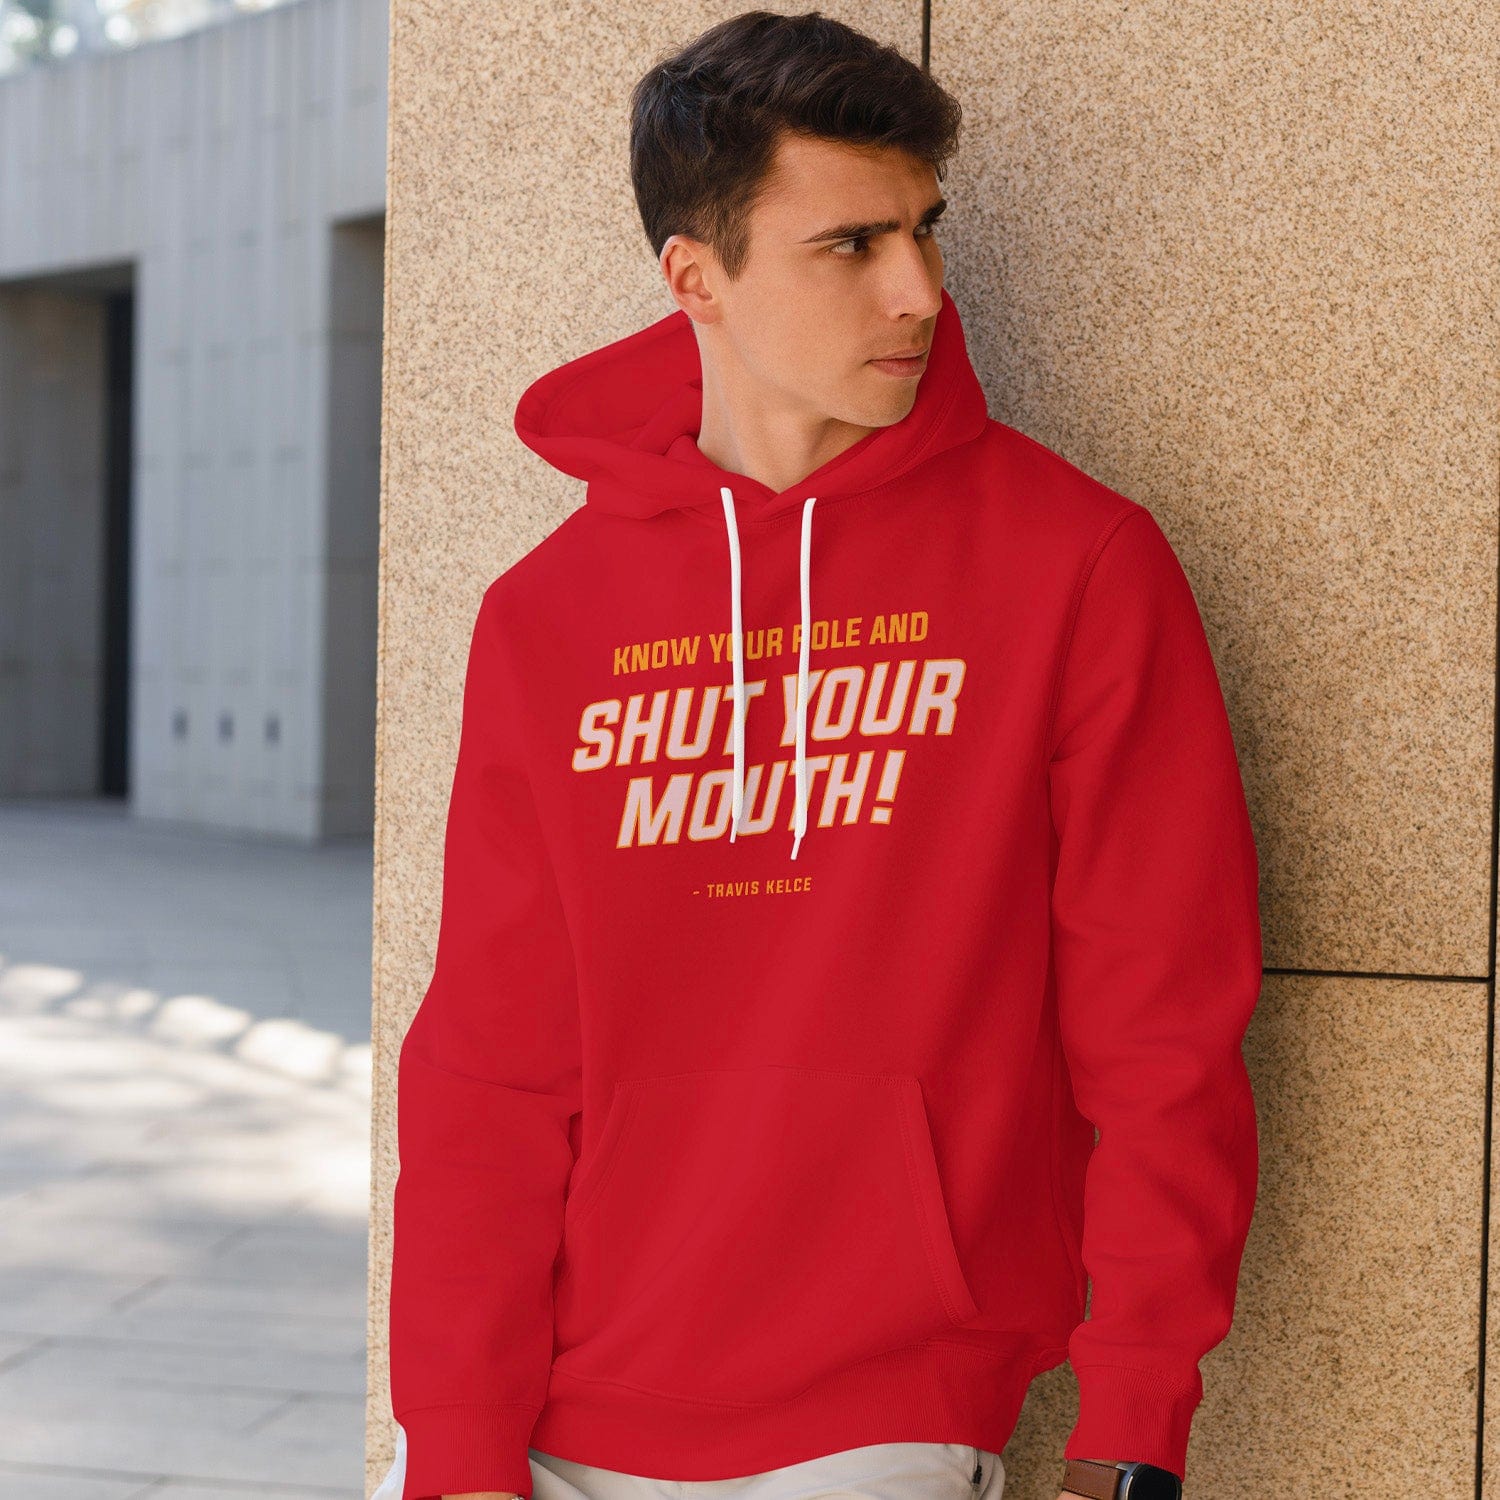 KC Swag Kansas City Chiefs whute, yellow SHUT YOUR MOUTH on red fleece pullover hoodie worn by male model leaning on stone wall in outdoor plaza